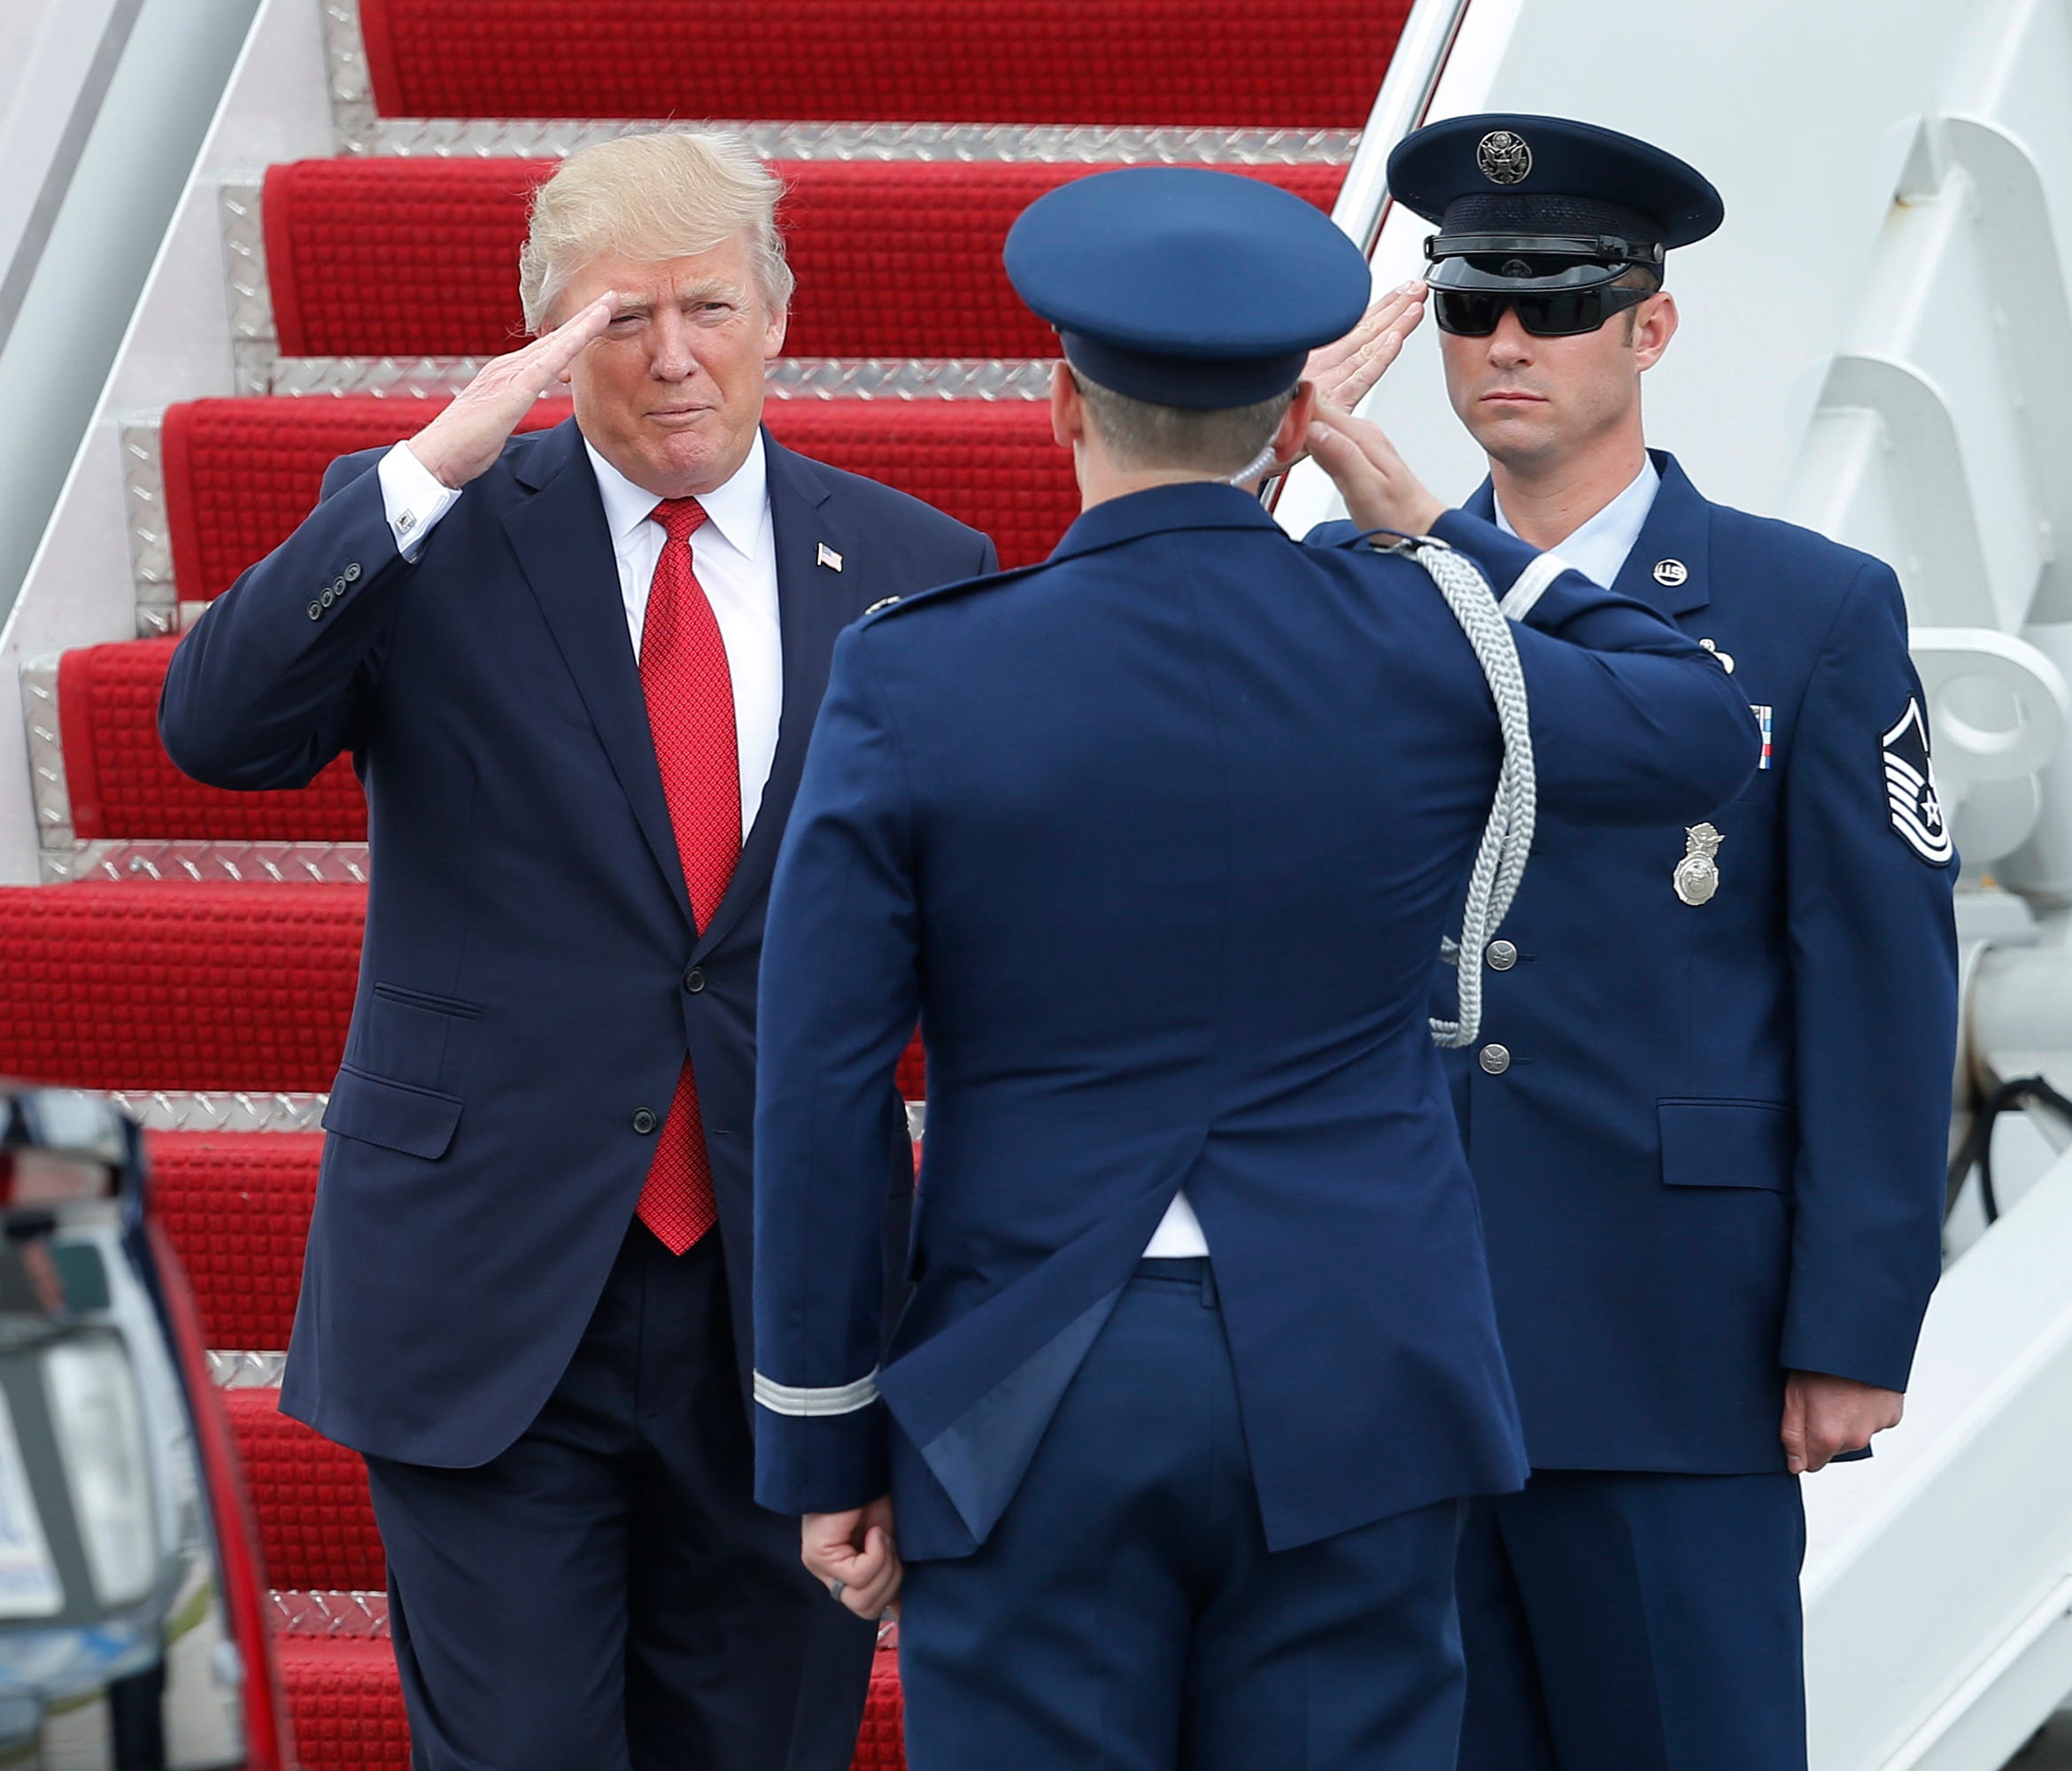 President Trump salutes upon his arrival on Air Force One at Palm Beach International Airport in West Palm Beach, Fla., Thursday.